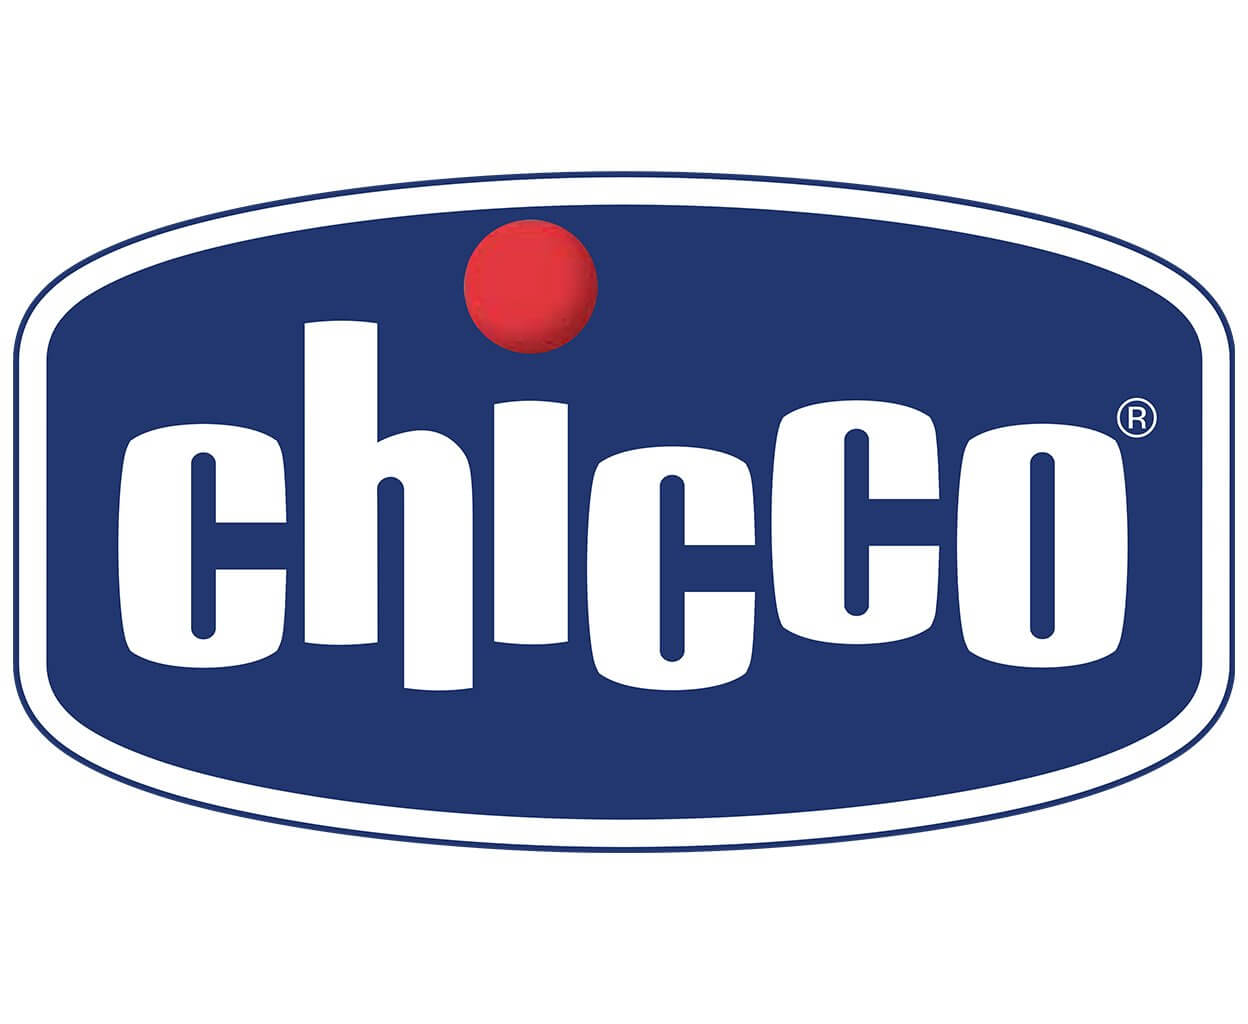 Chicco - Buy Chicco Baby Product Online in India